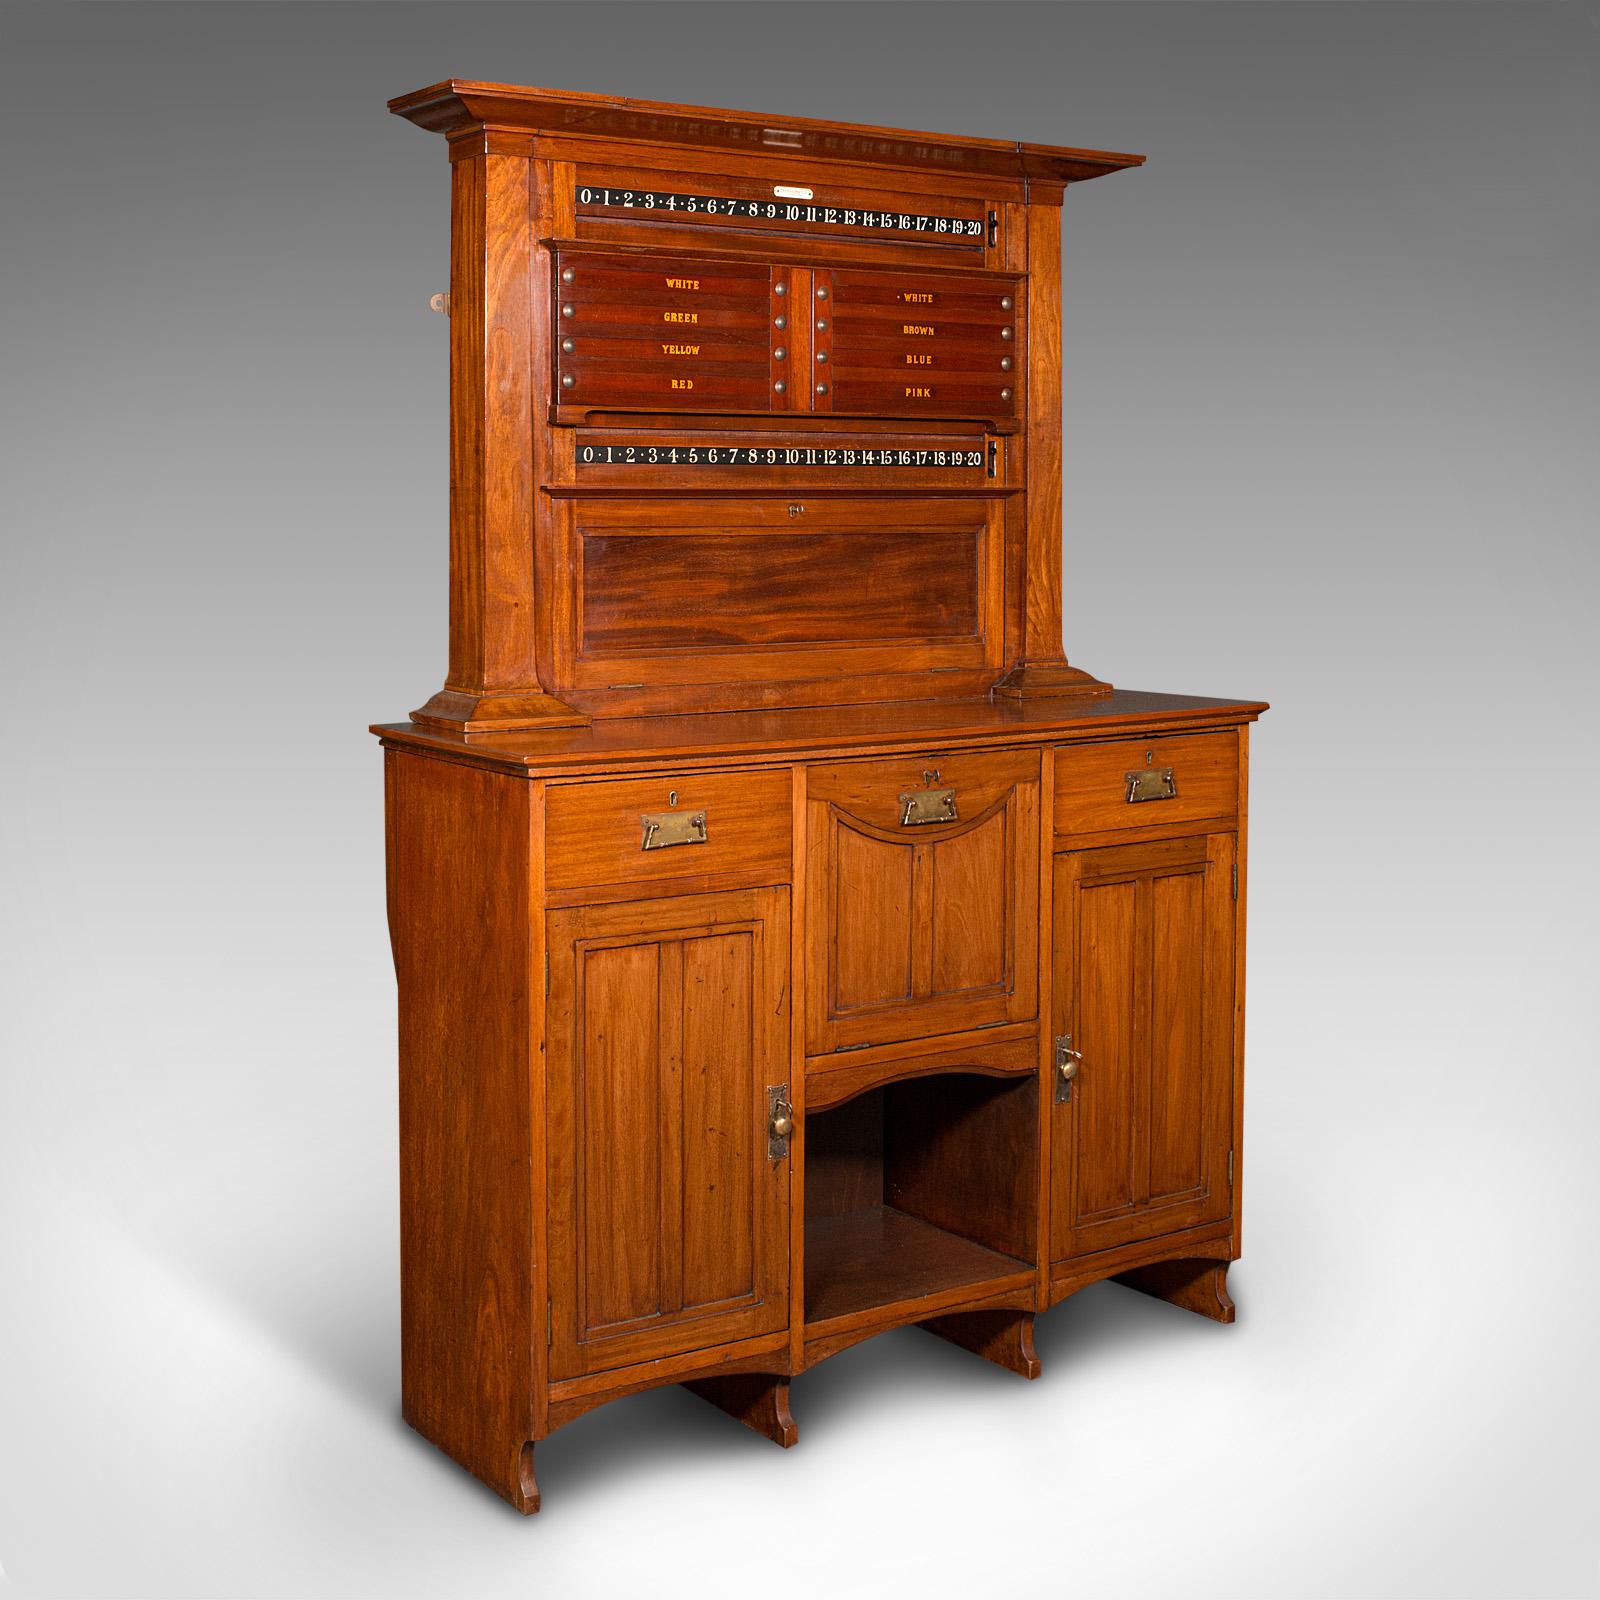 This is a large antique score cabinet. An English, walnut billiard and pool scoreboard by Thurston, dating to the Edwardian period, circa 1910.

Of impressive proportion and superb decorative appeal
Displays a desirable aged patina and in very